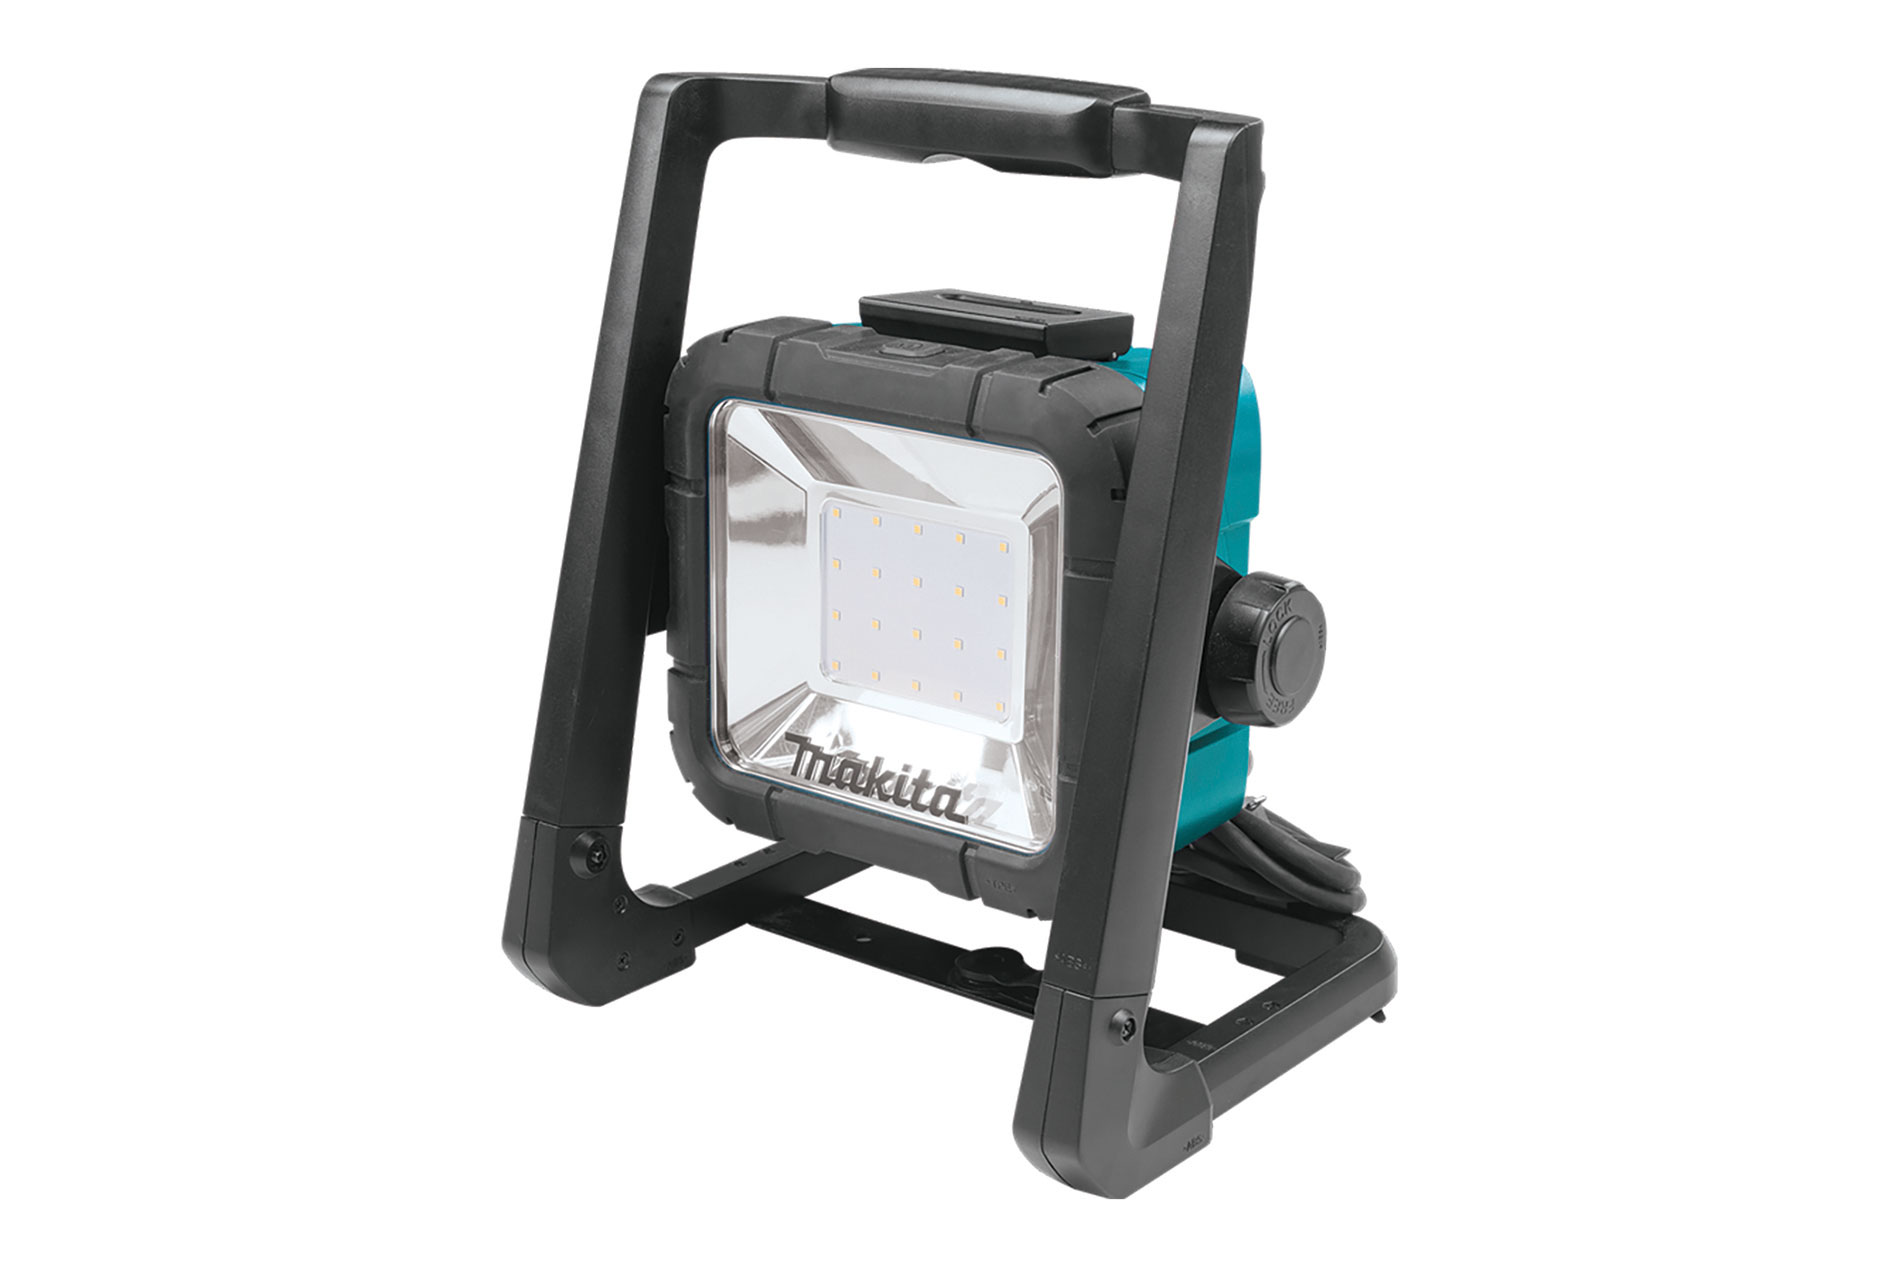 Blue and gray floodlight. Image by Makita.